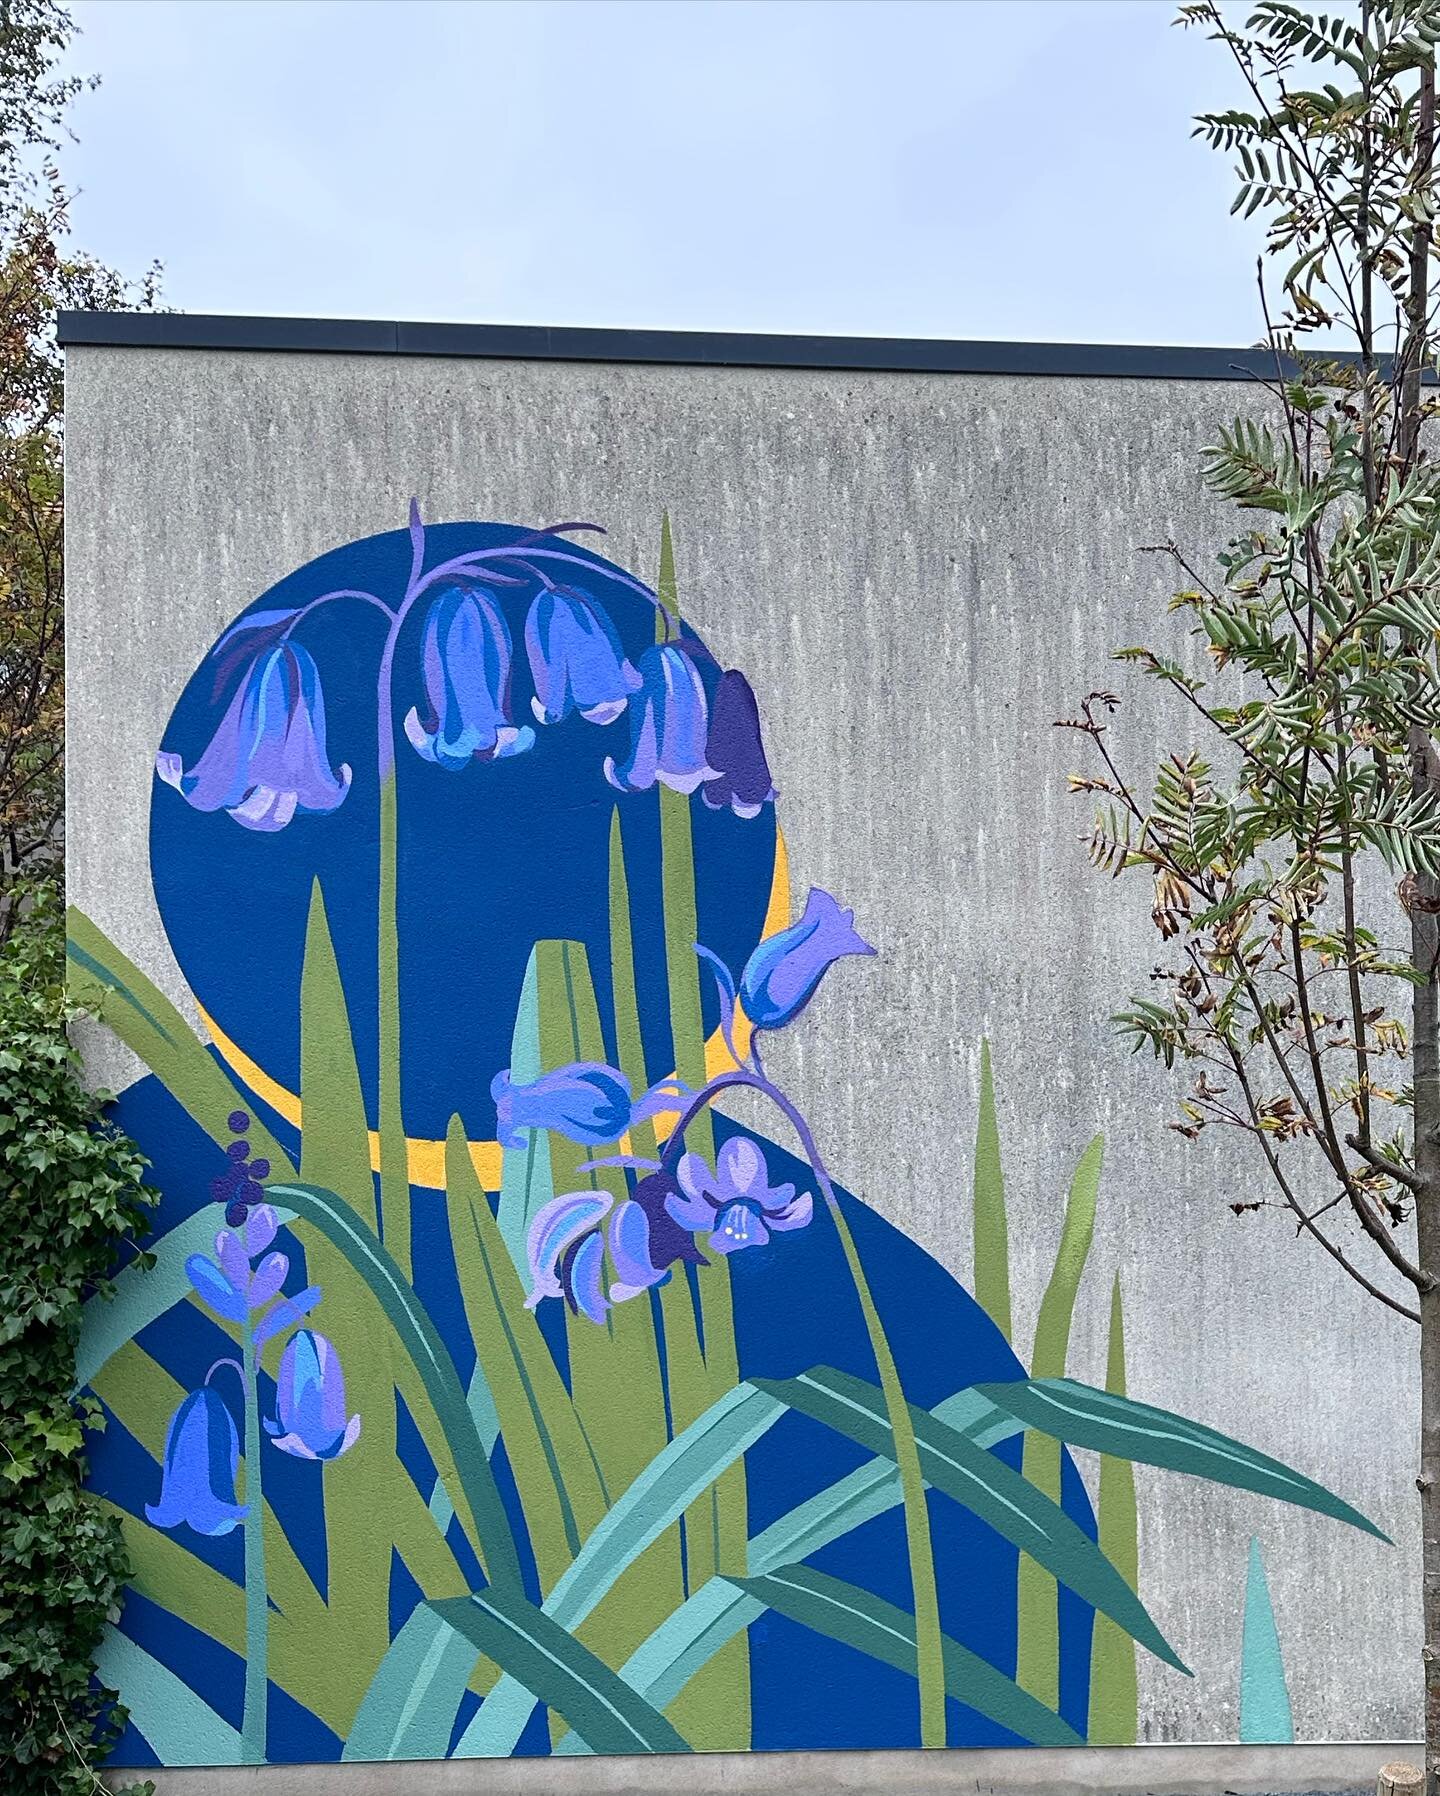 7 towns, 7 flowers! Commission through @daisychaininc and Antrim &amp; Newton Abbey District council, Northern Ireland. Featuring : Bluebells, Cherry blossom, Forget-me-not and wild rose
- 
Species chosen by each town council that felt representative